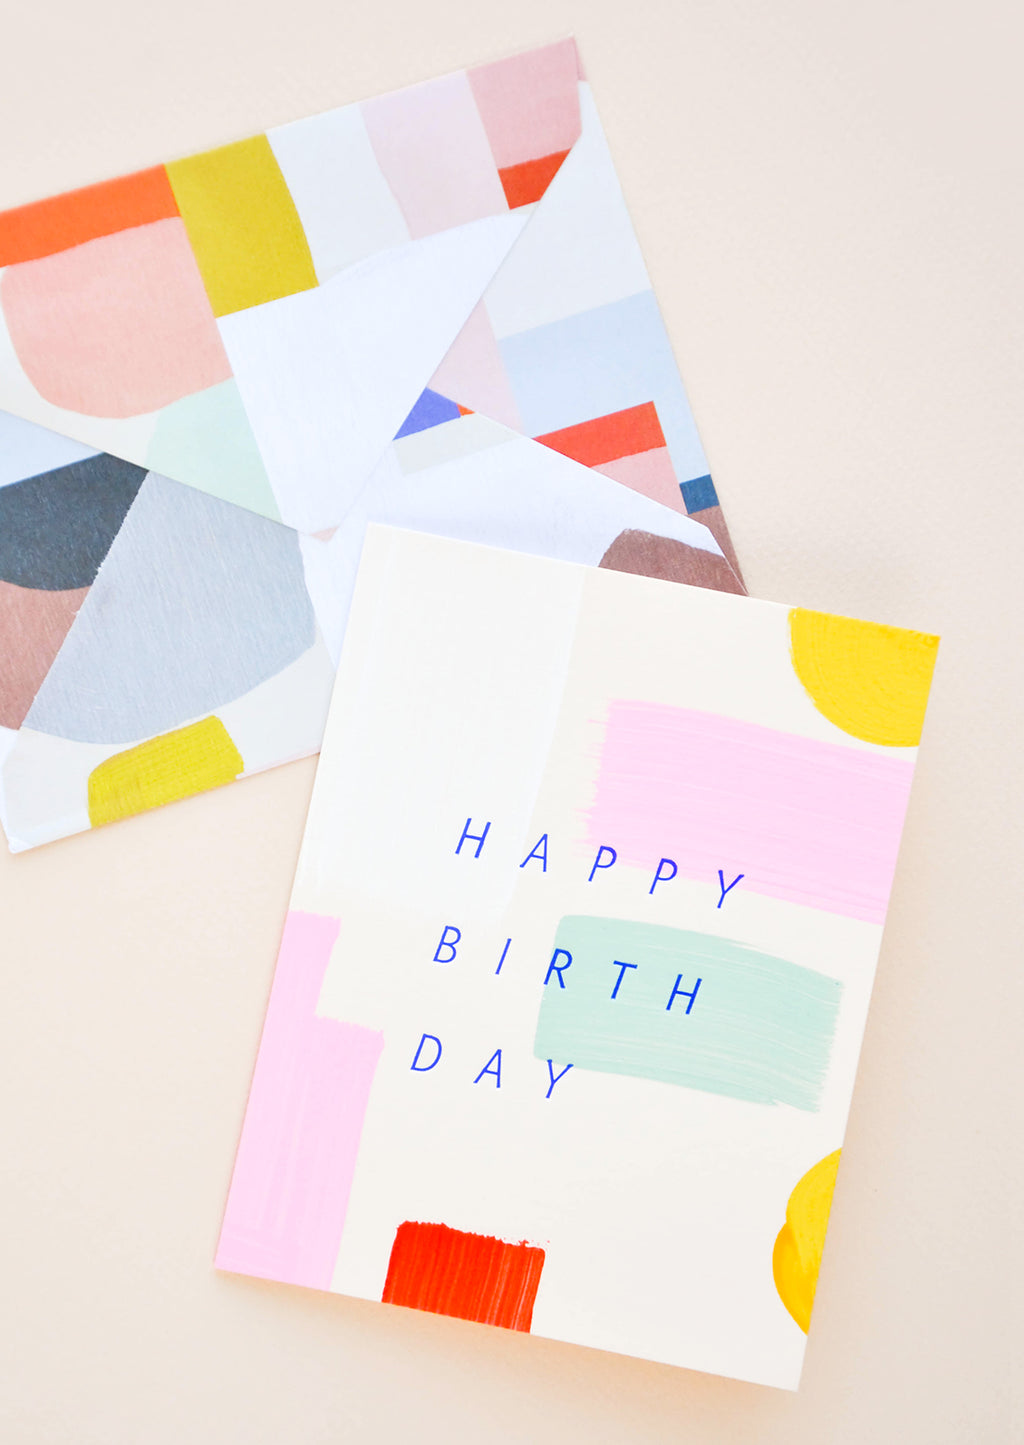 1: Greeting card with hand-painted colorful brushstrokes and "Happy Birthday" printed in cobalt blue